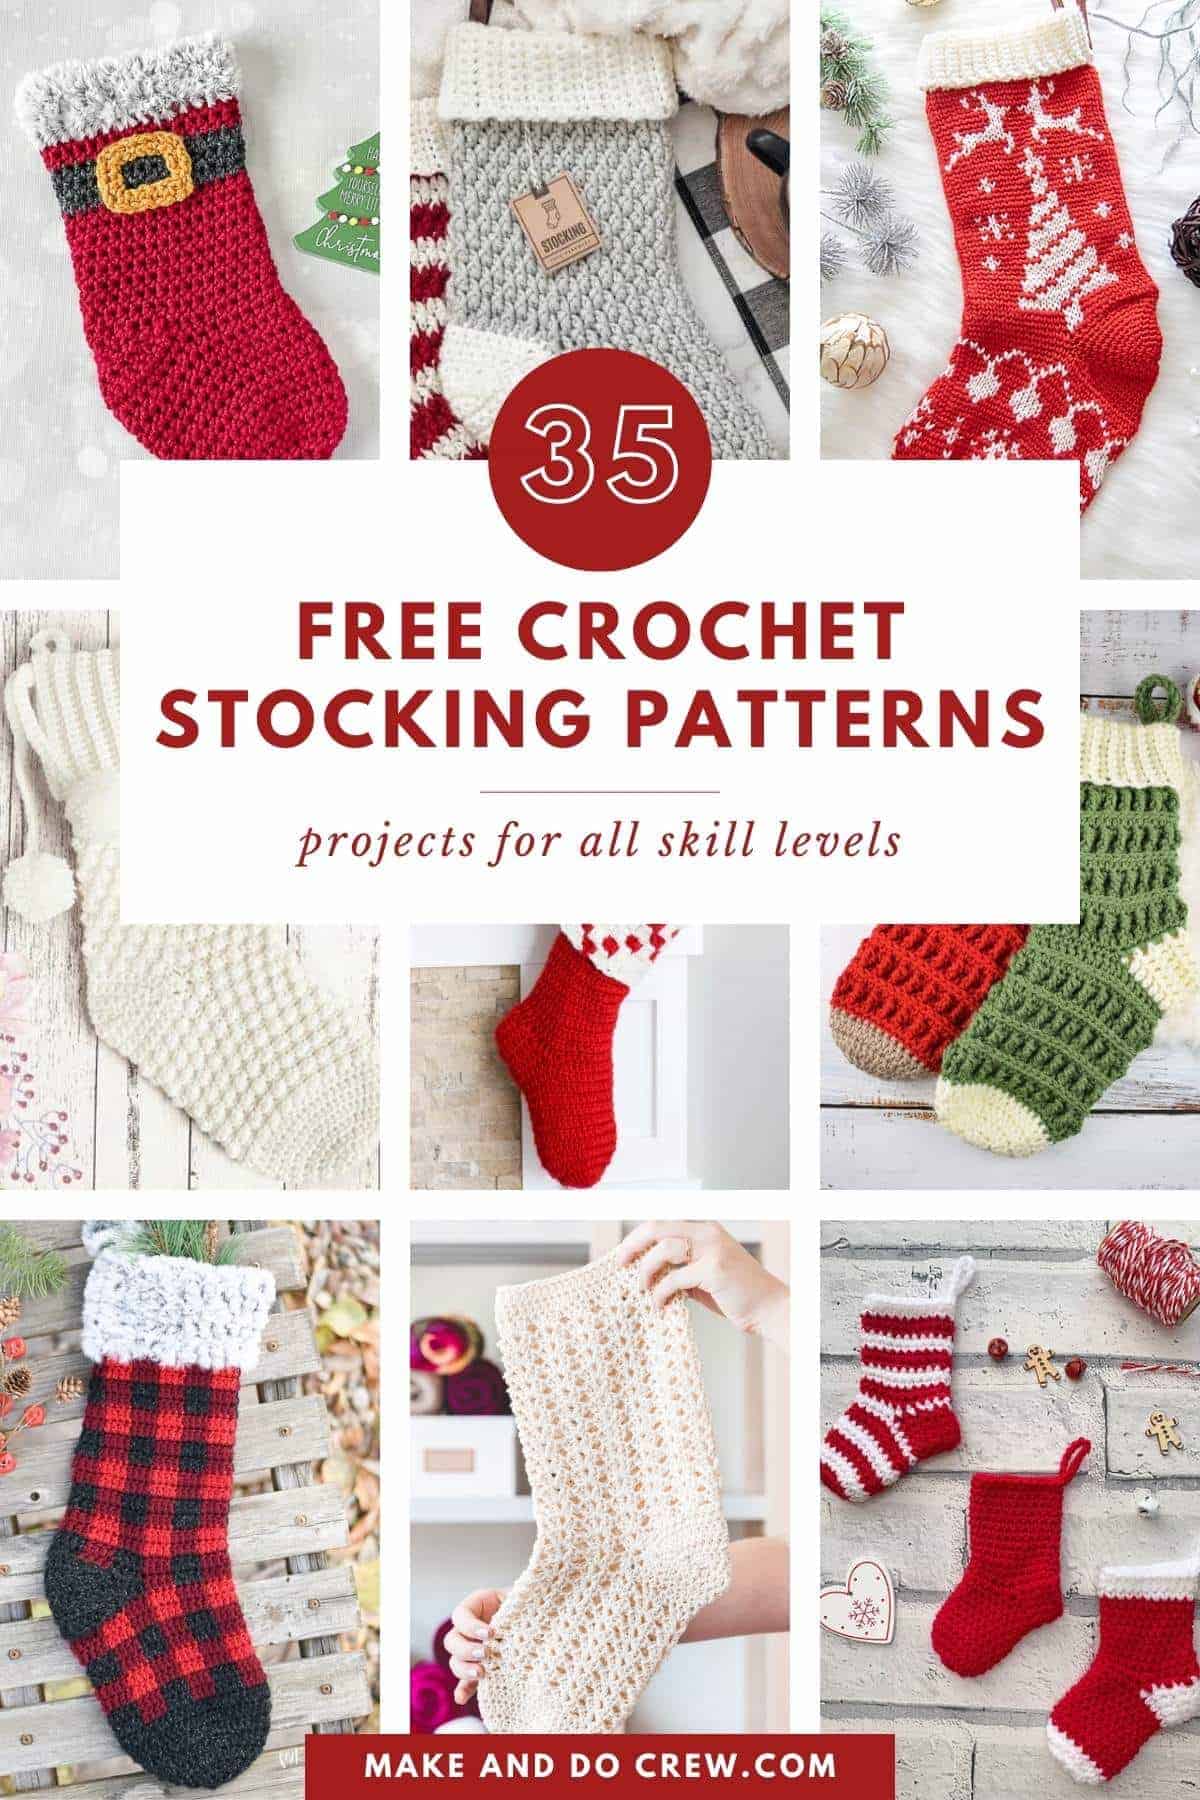 Collection of free crochet stocking patterns for all skill levels.